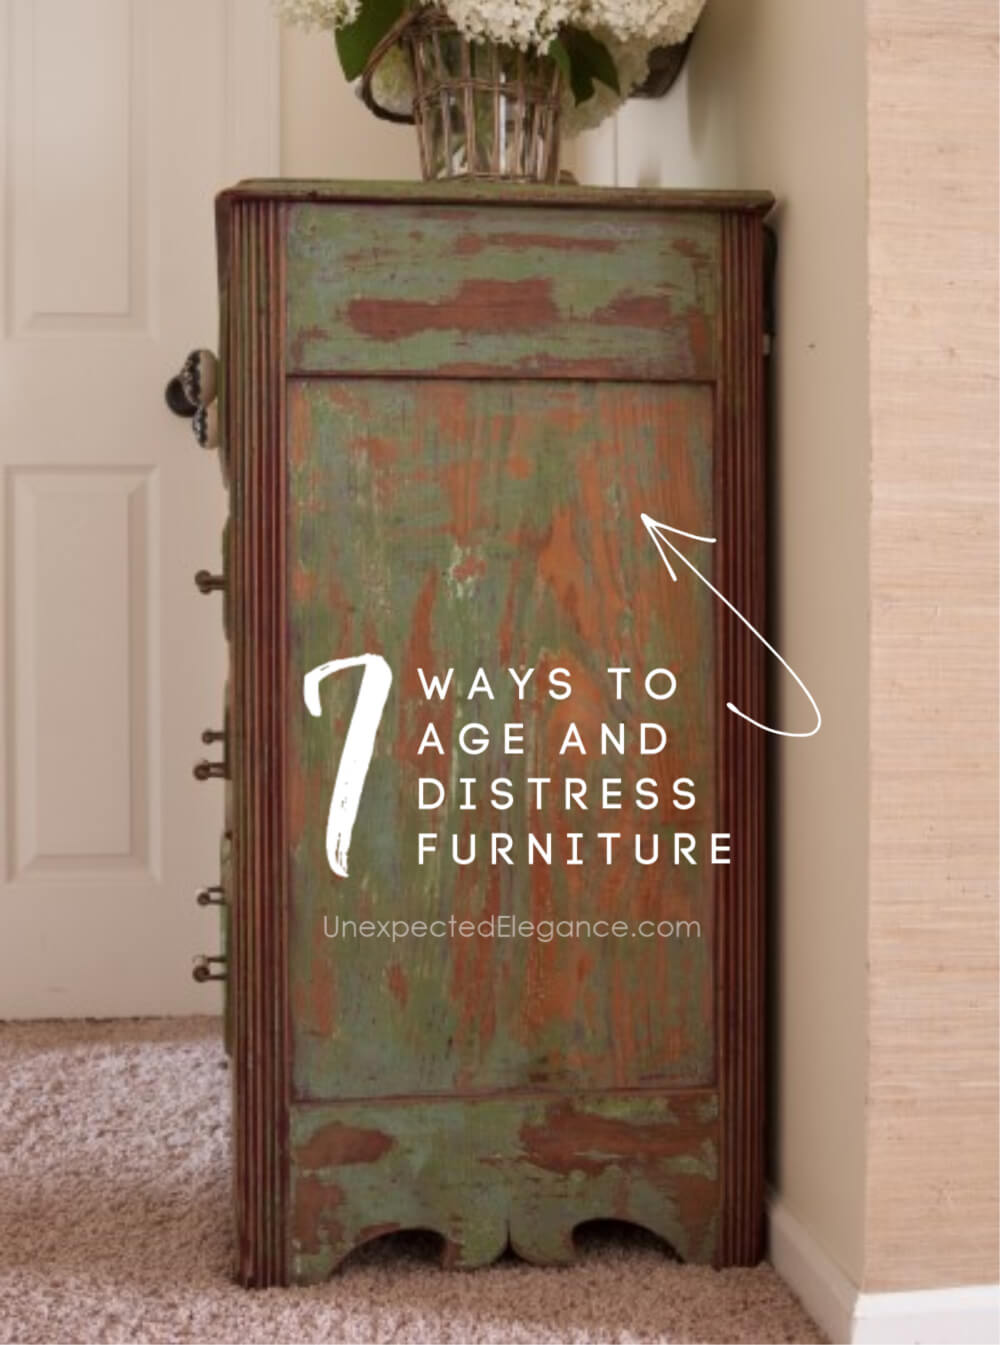 7 Ways To Age And Distress Furniture, How To Make A Window Frame Look Distressed